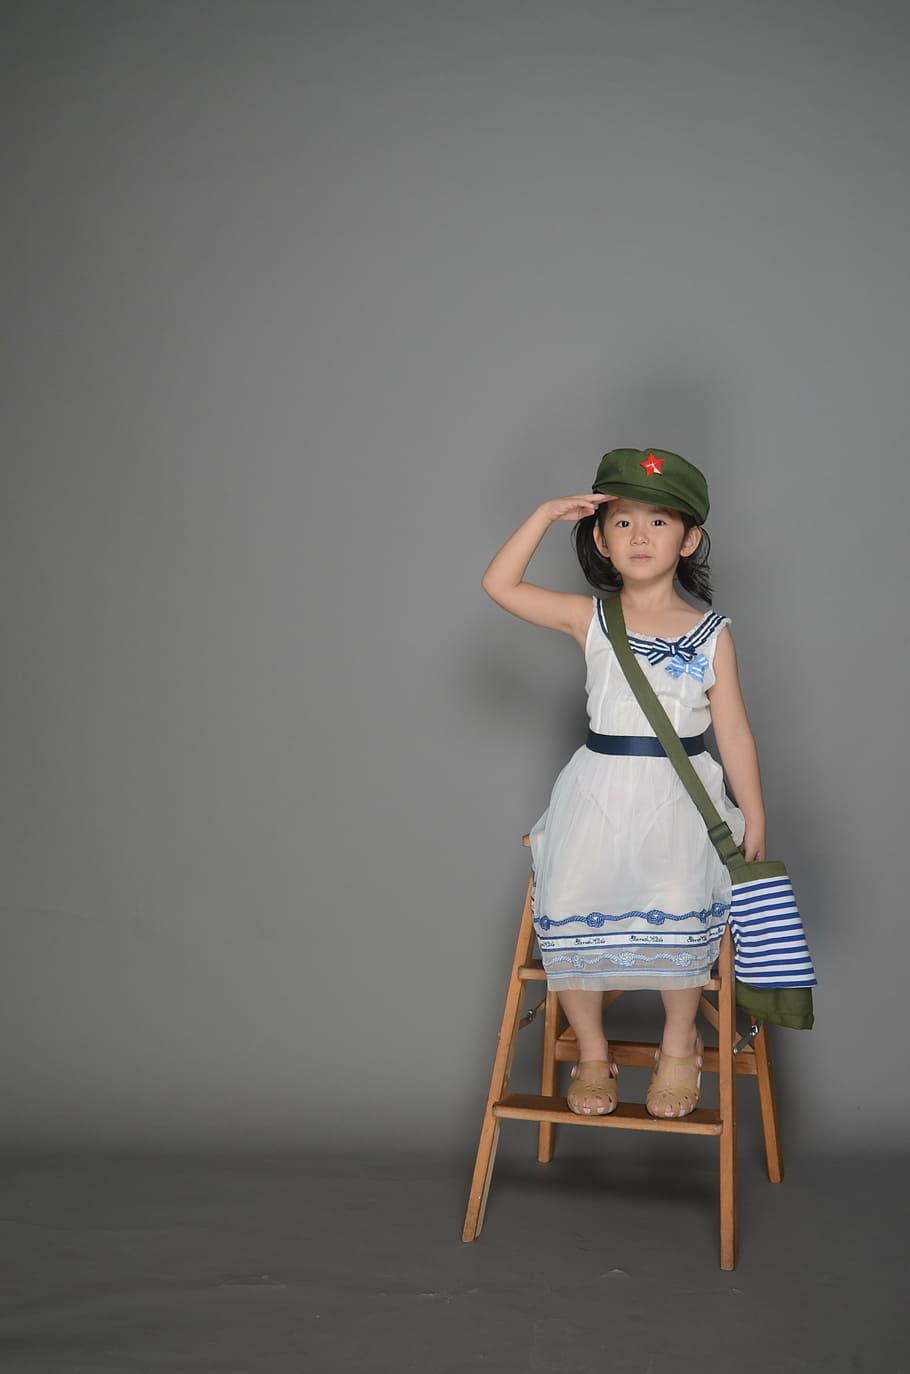 cute, military cap, army backpack, child, girls, studio, original photo, chair, one Person, people